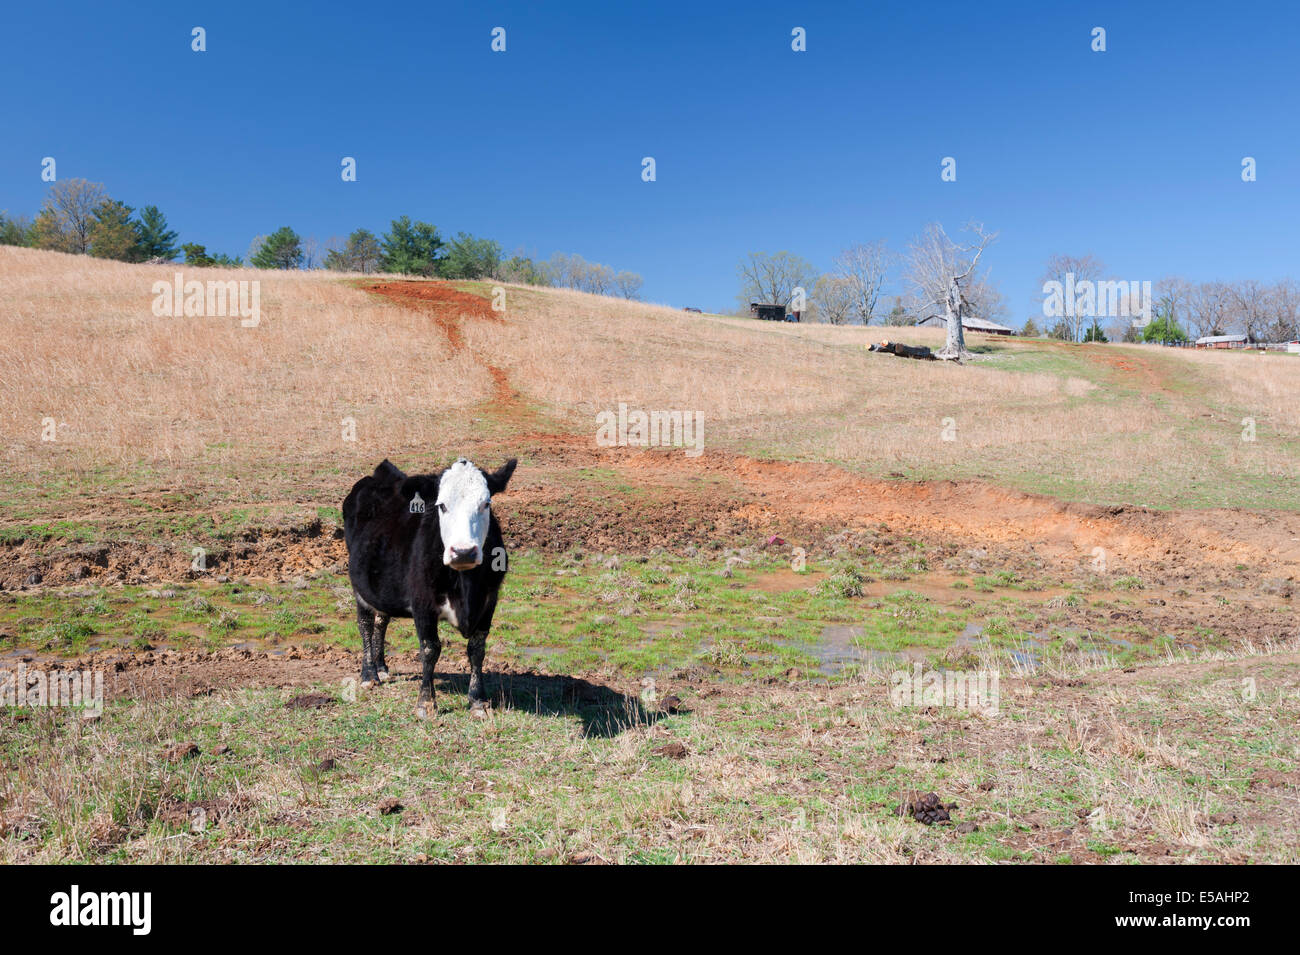 Lone cow in a field, Shenandoah Valley, Virginia, USA. Stock Photo